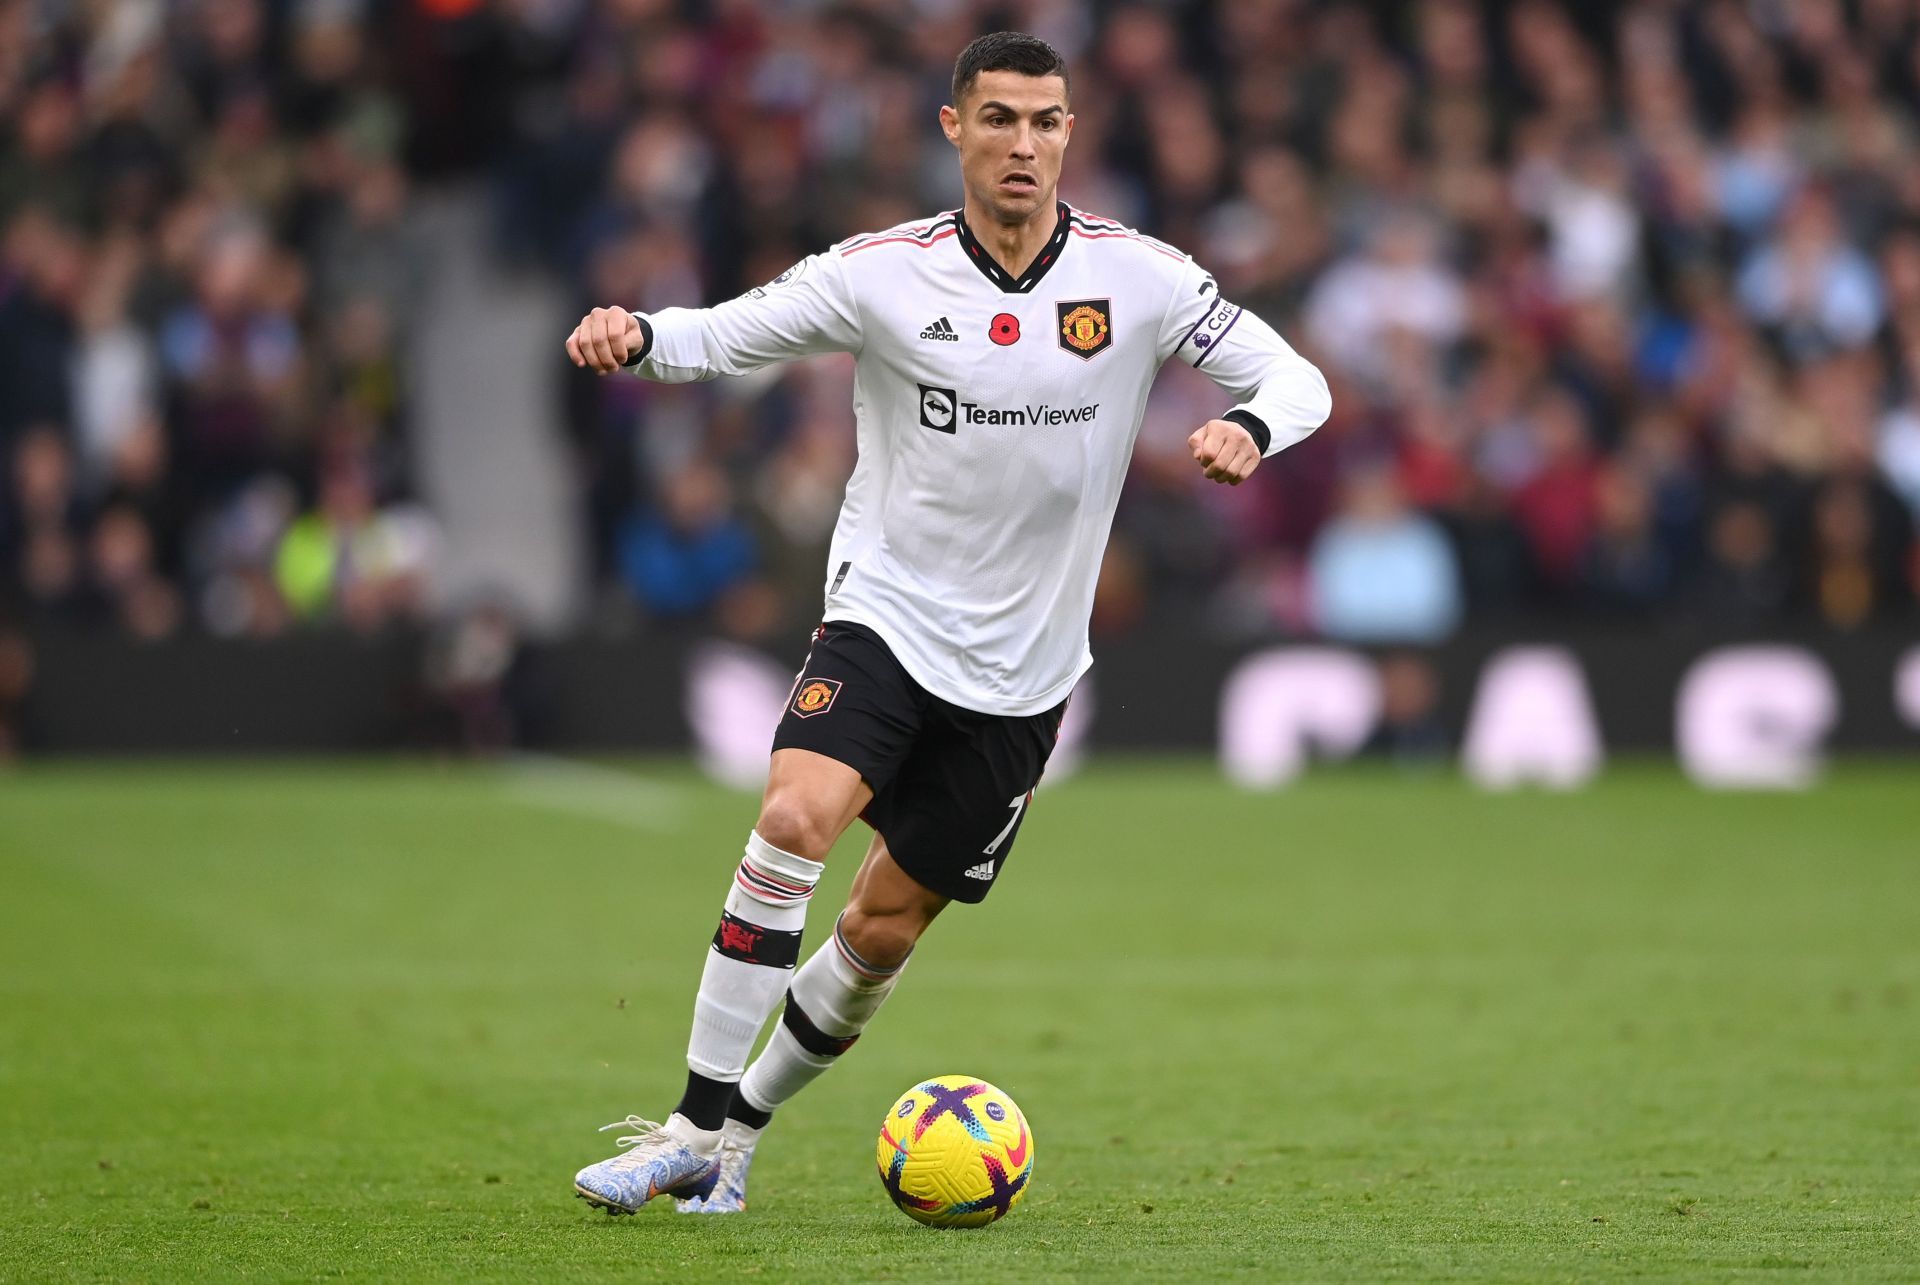 Manchester United superstar Cristiano Ronaldo is set to feature for Portugal during the 2022 FIFA World Cup